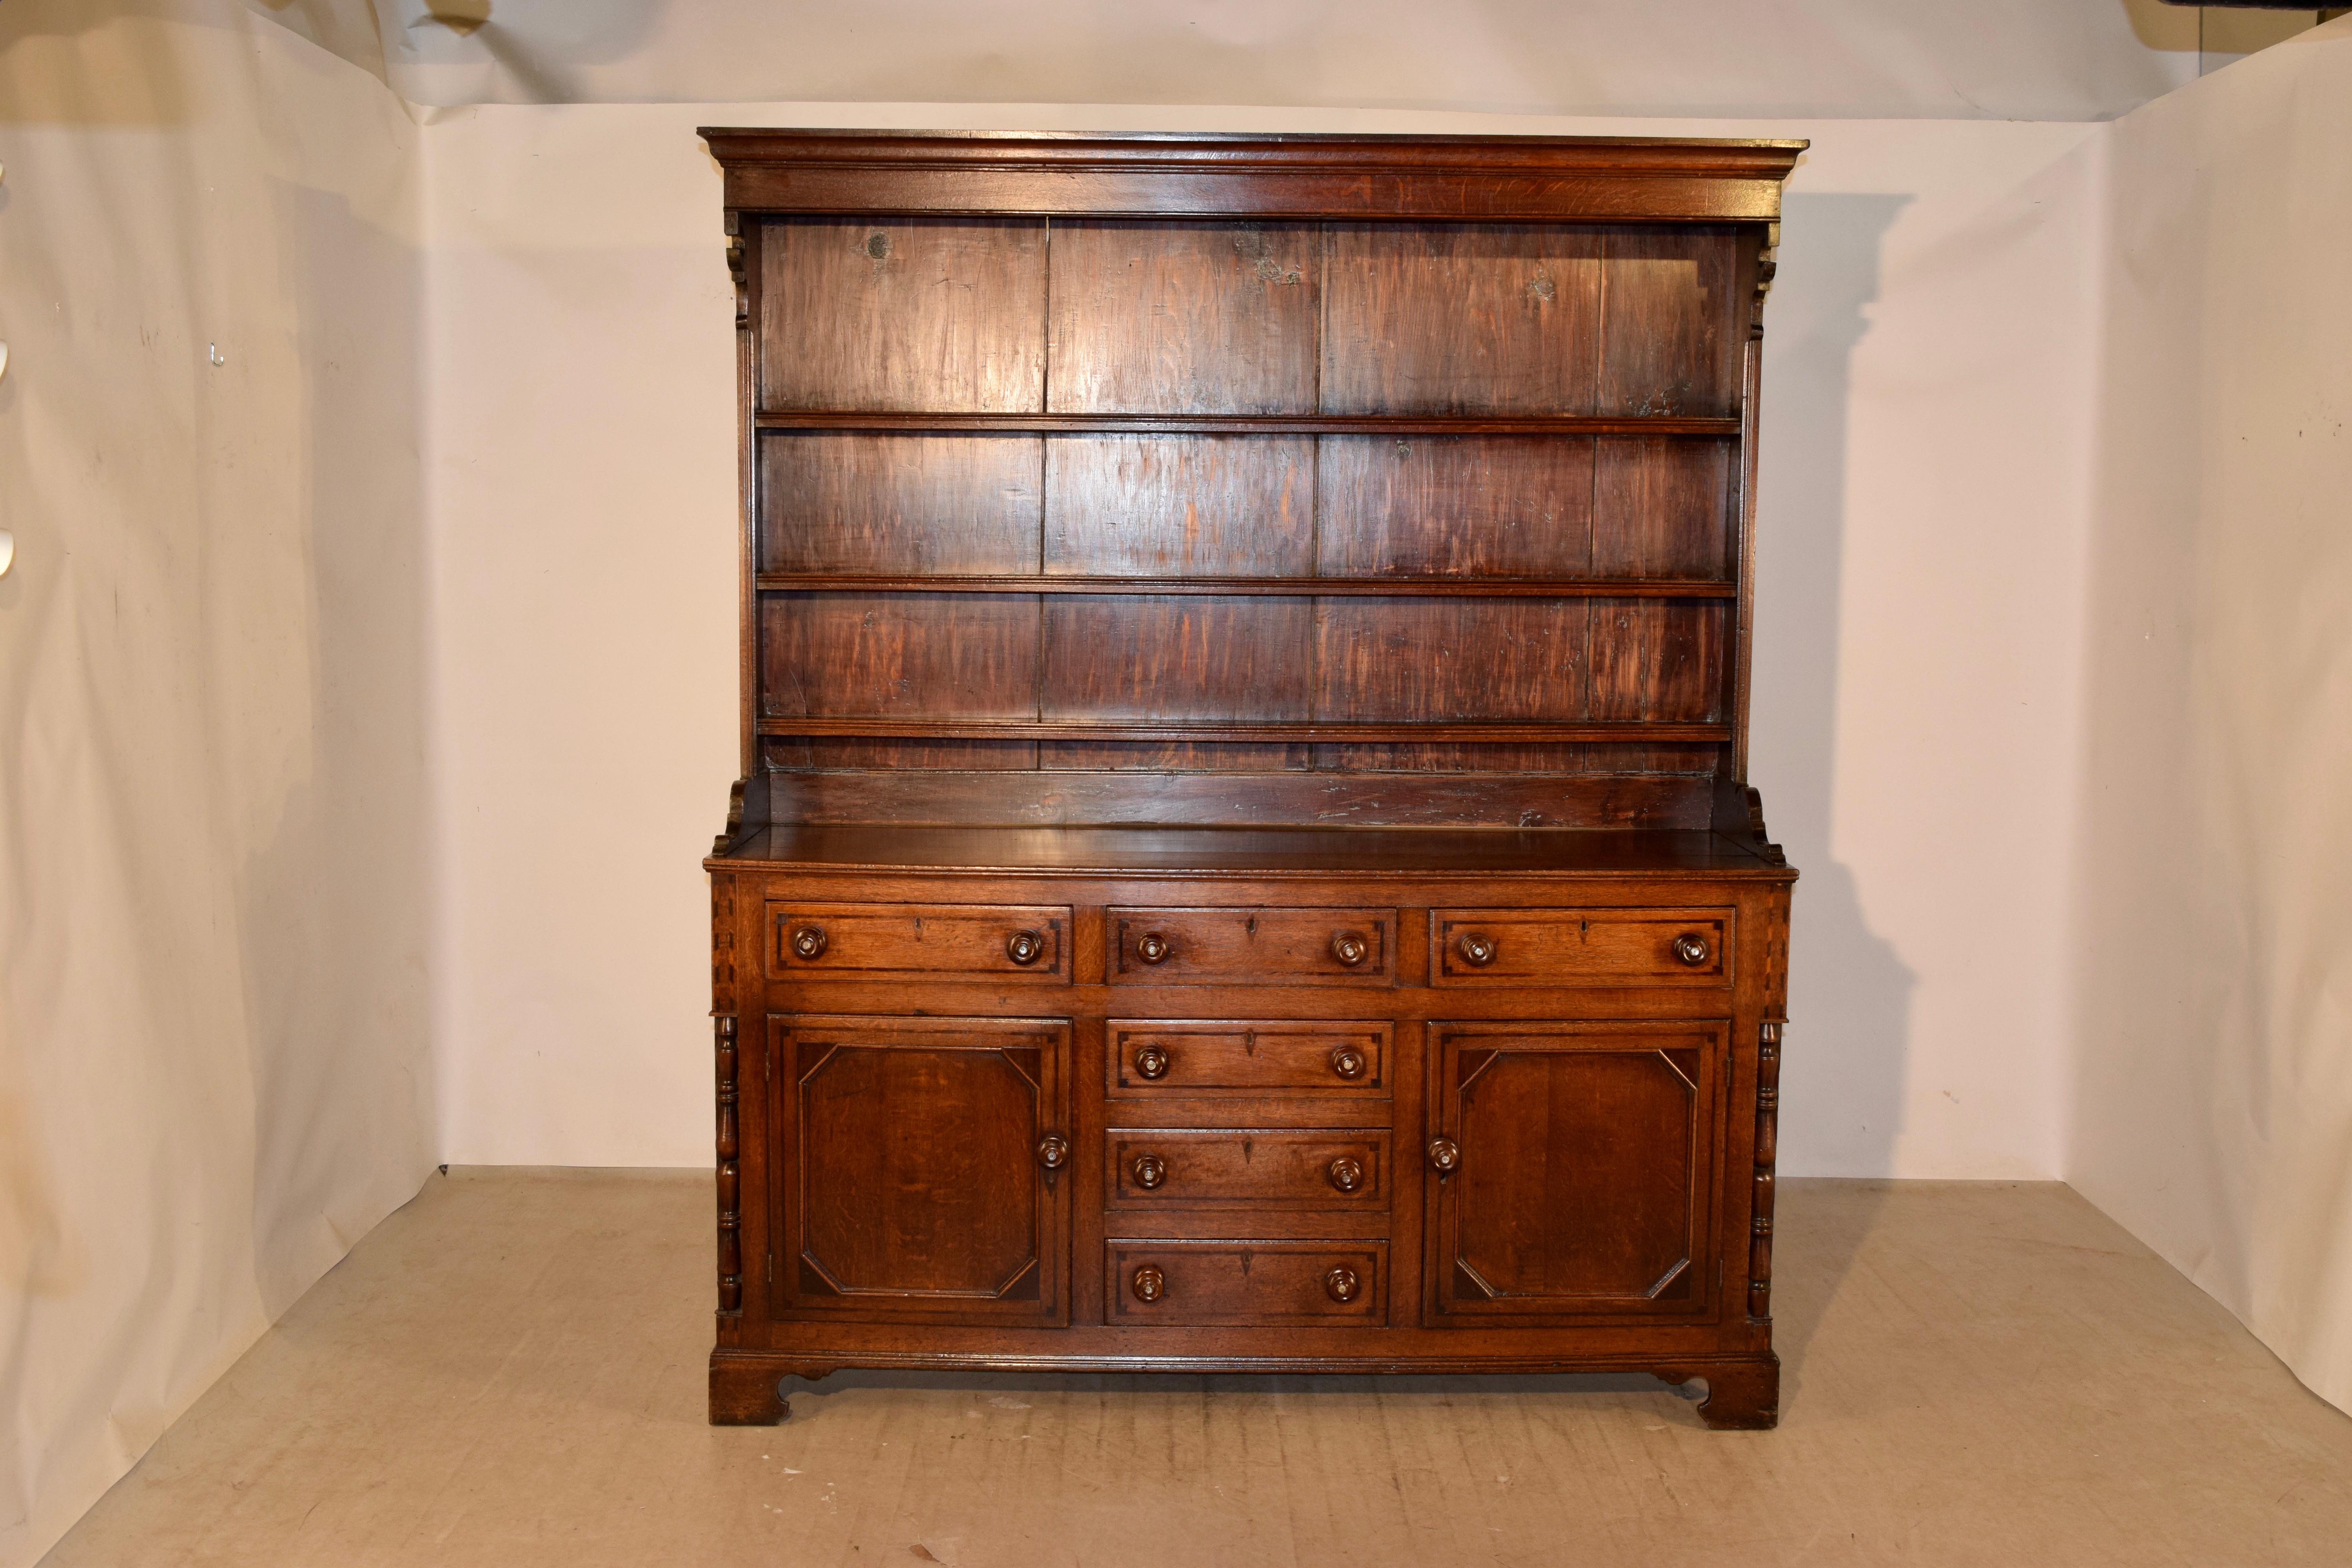 Period Georgian Welsh dresser made from oak and pine, circa 1780-1820. The cupboard has a stately crown molding over three shelves, with decorative shaped corbels on the sides of the shelf, following down to a base with raised paneled sides and